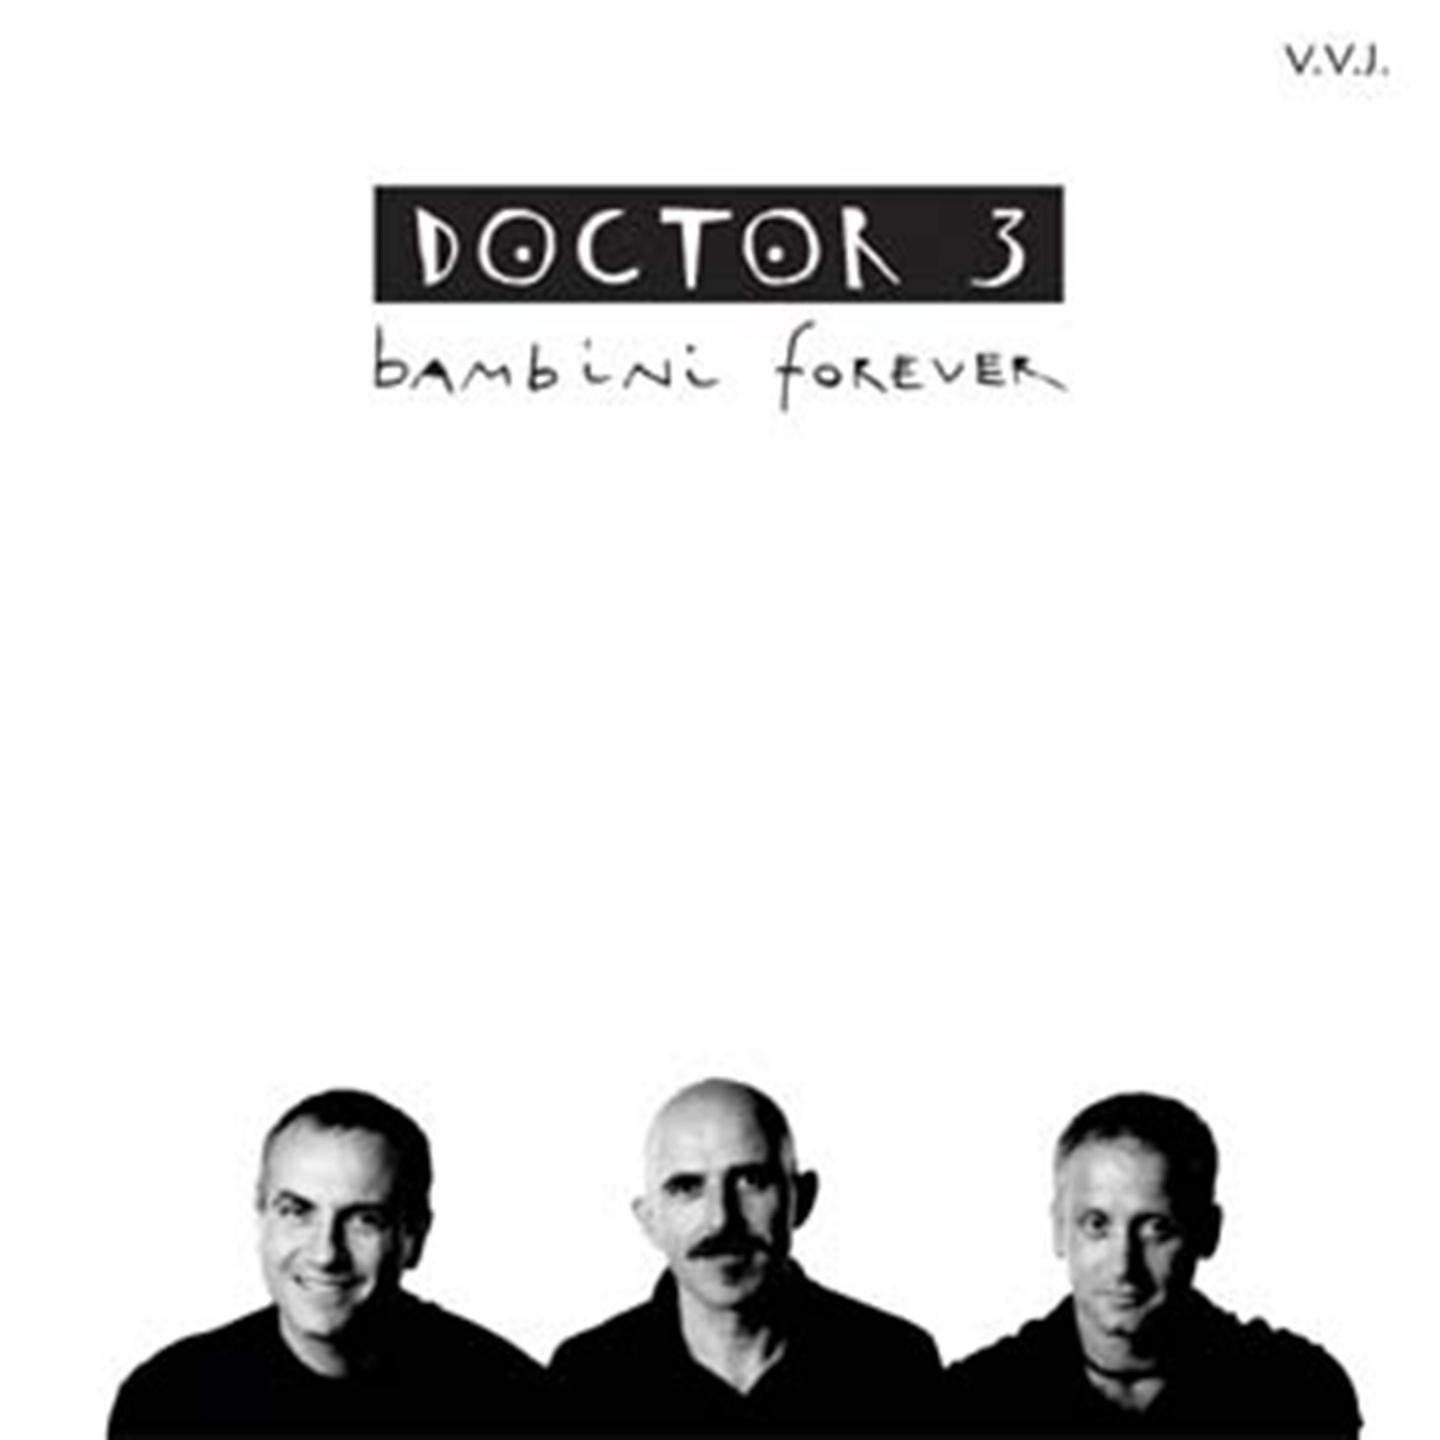 Doctor 3 - Medley Bambino 7: For Non One; What A Pill!